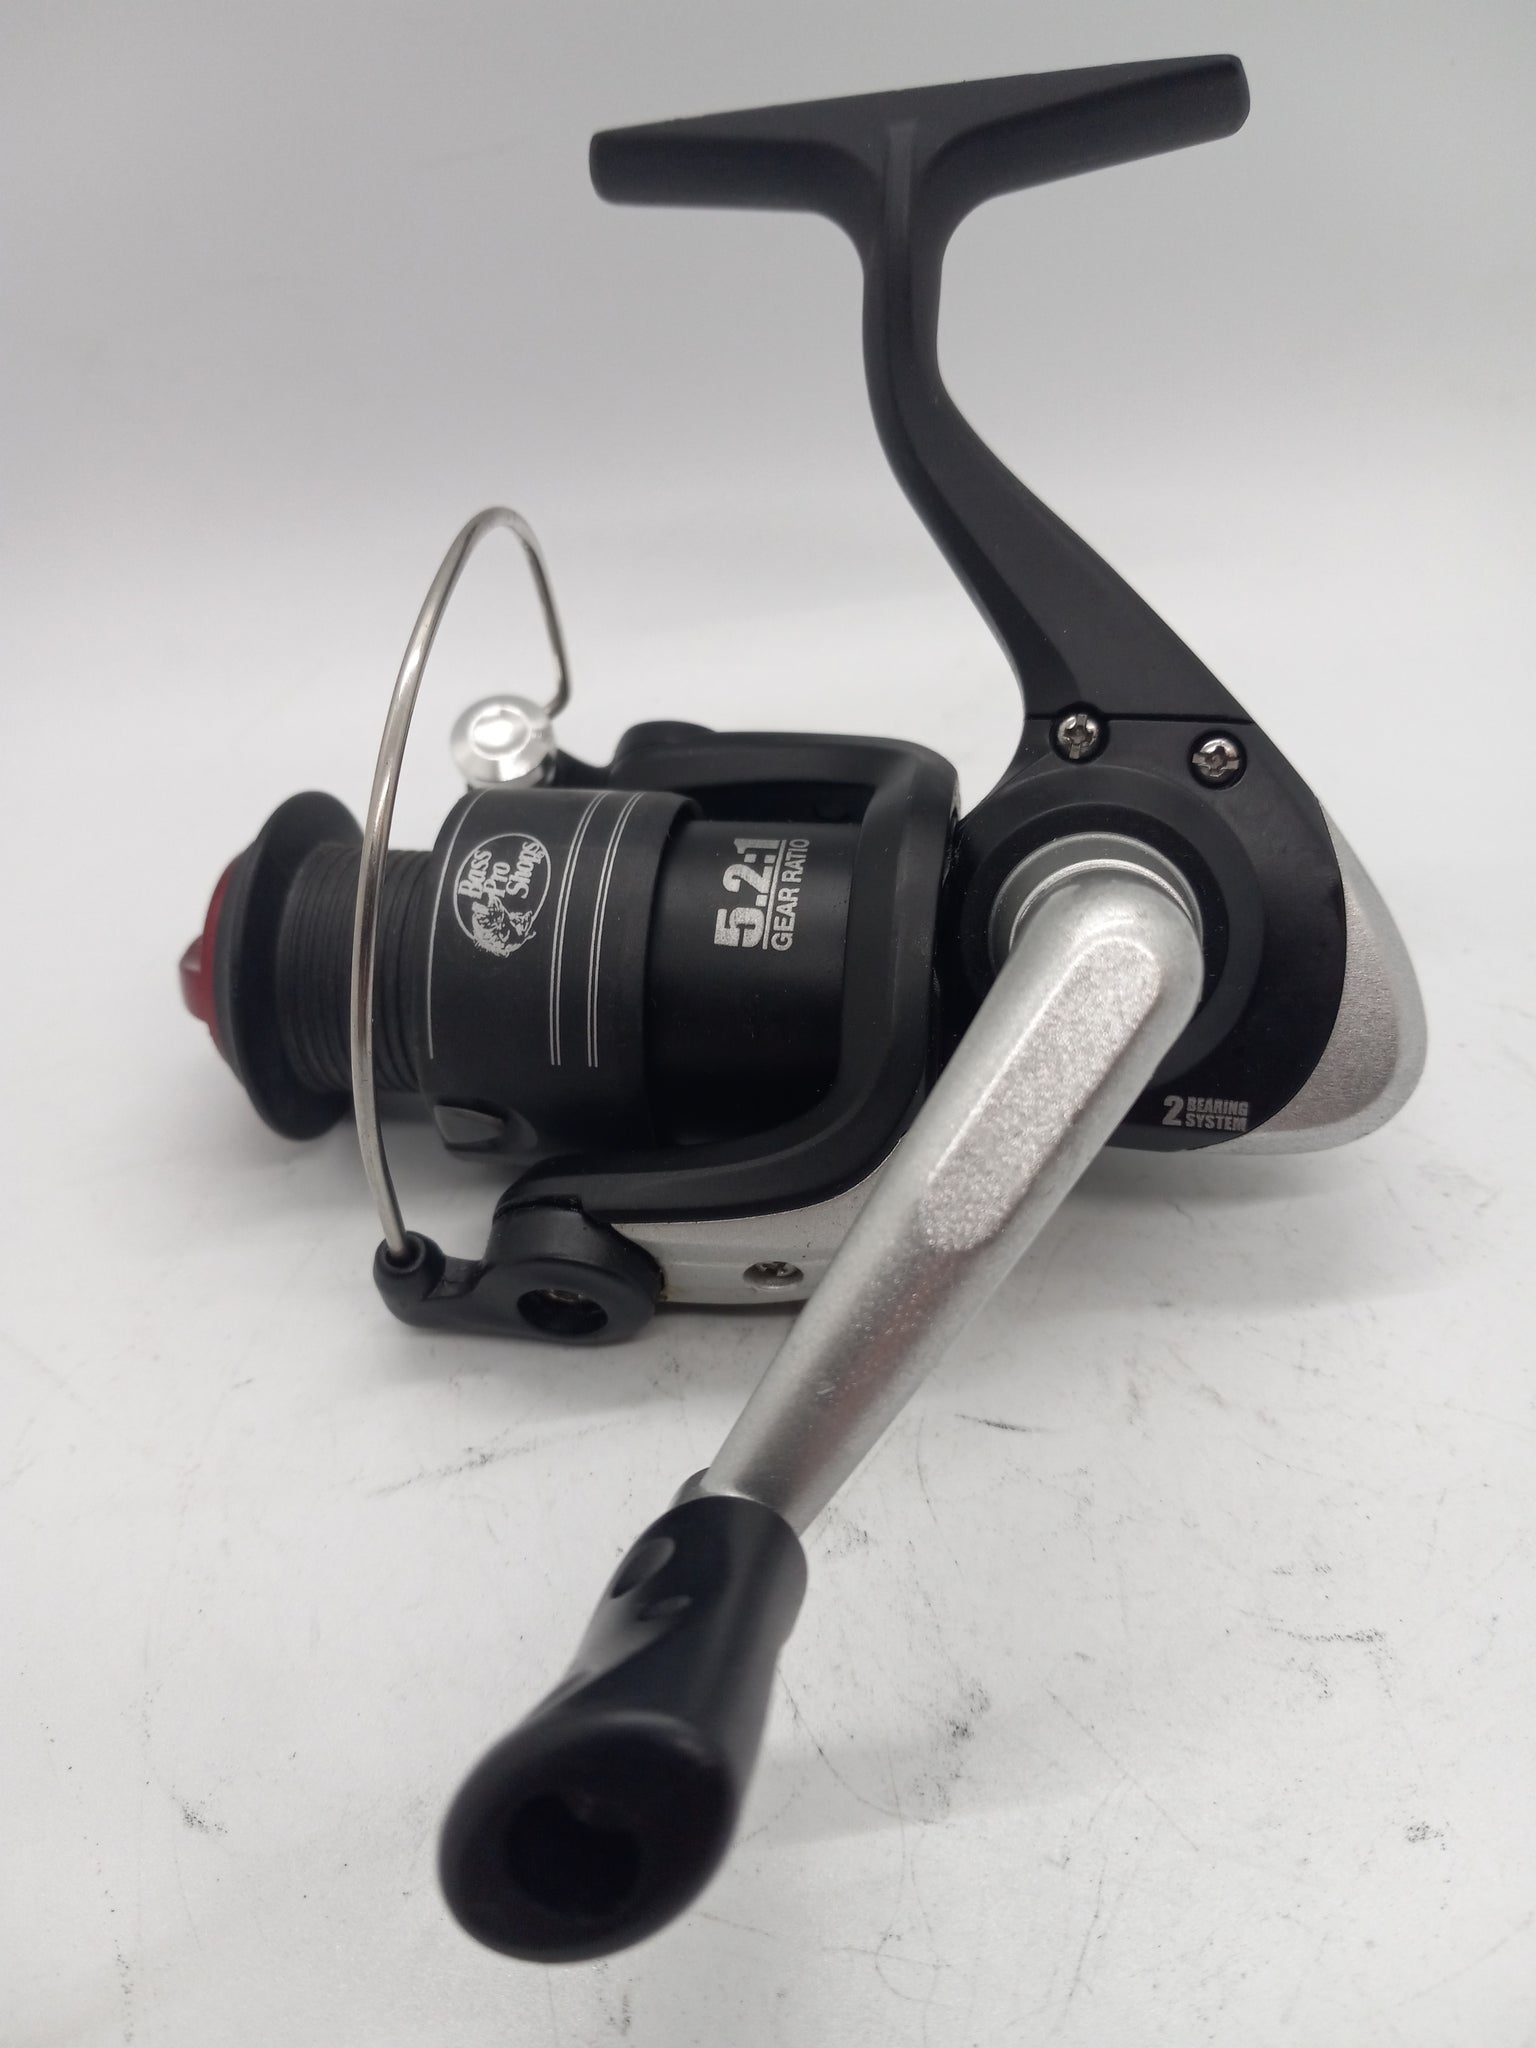 Bass Pro Shops PQ35SE Pro Qualifier Spinning Reel FISHING (TESTED WORKING)